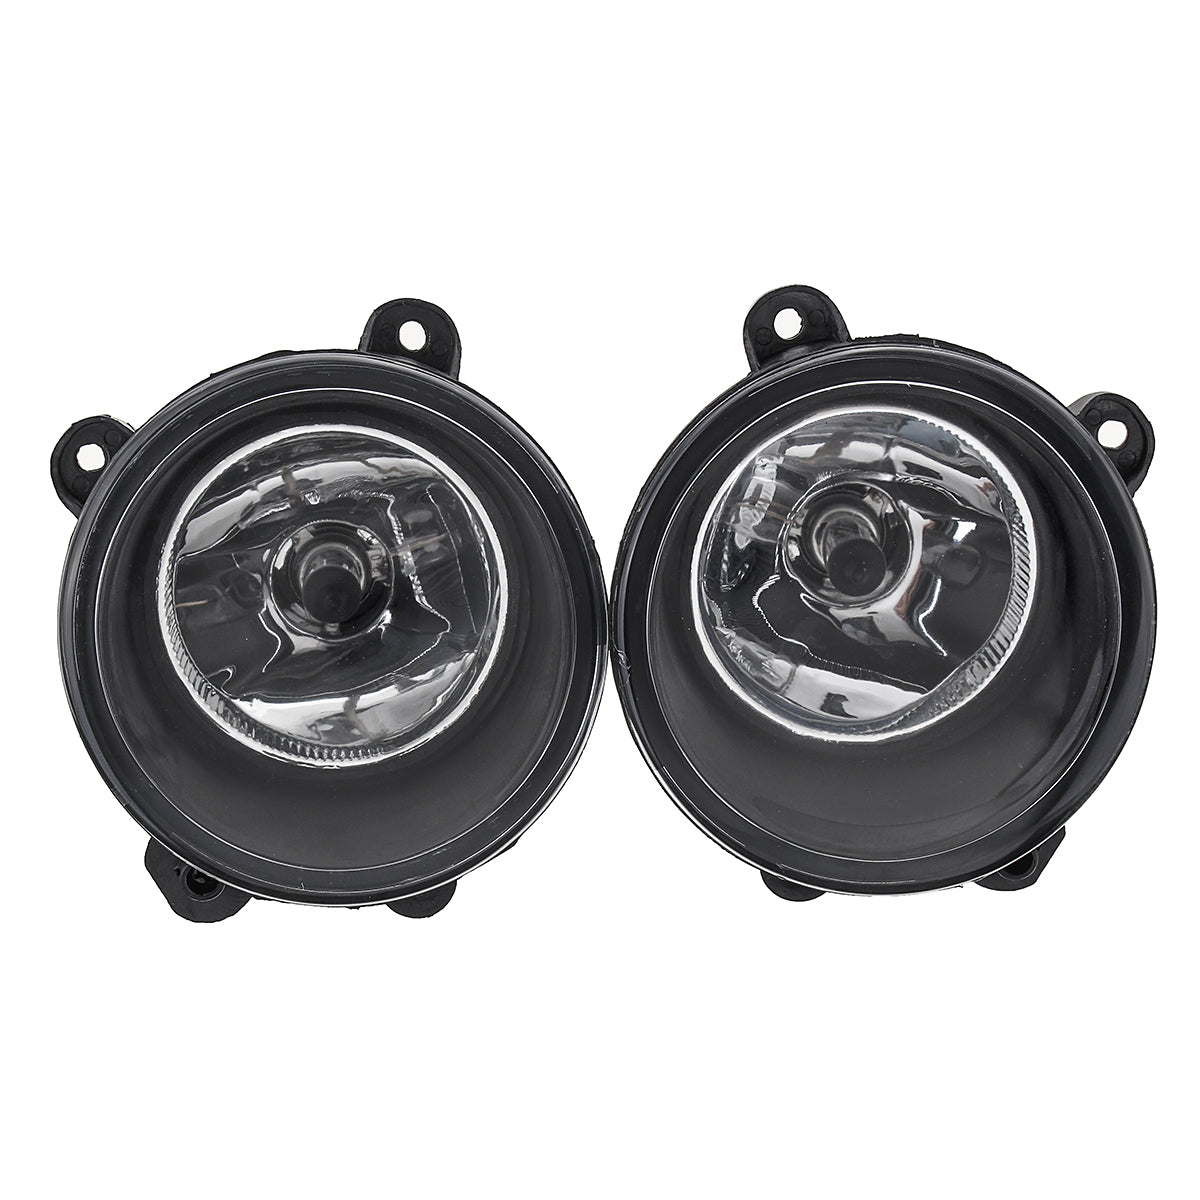 Dark Slate Gray Car Front Fog Lights with H11 Halogen Bulbs Pair For Land Rover Discovery 3 Range Rover Sport